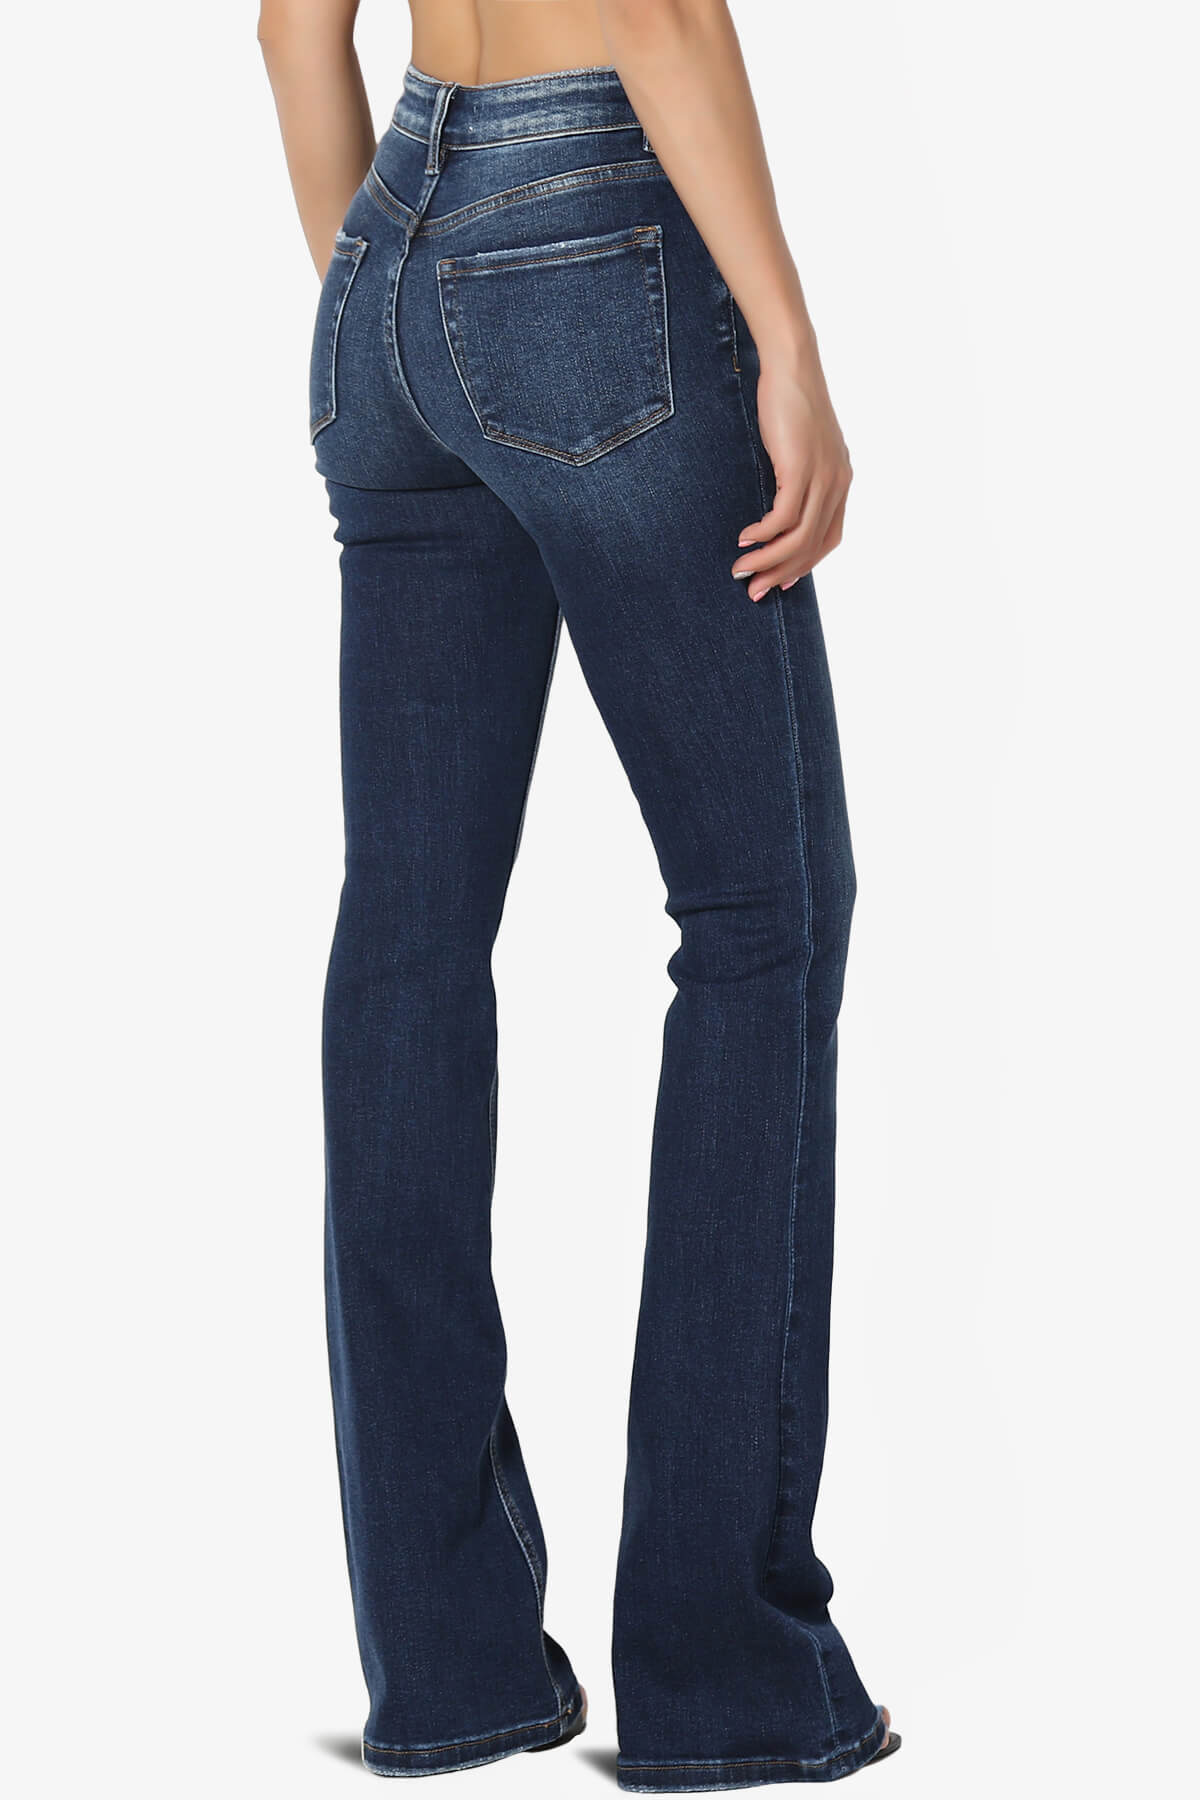 Load image into Gallery viewer, Swan Mid Rise Stretch Denim Bootcut Jeans DARK_4
